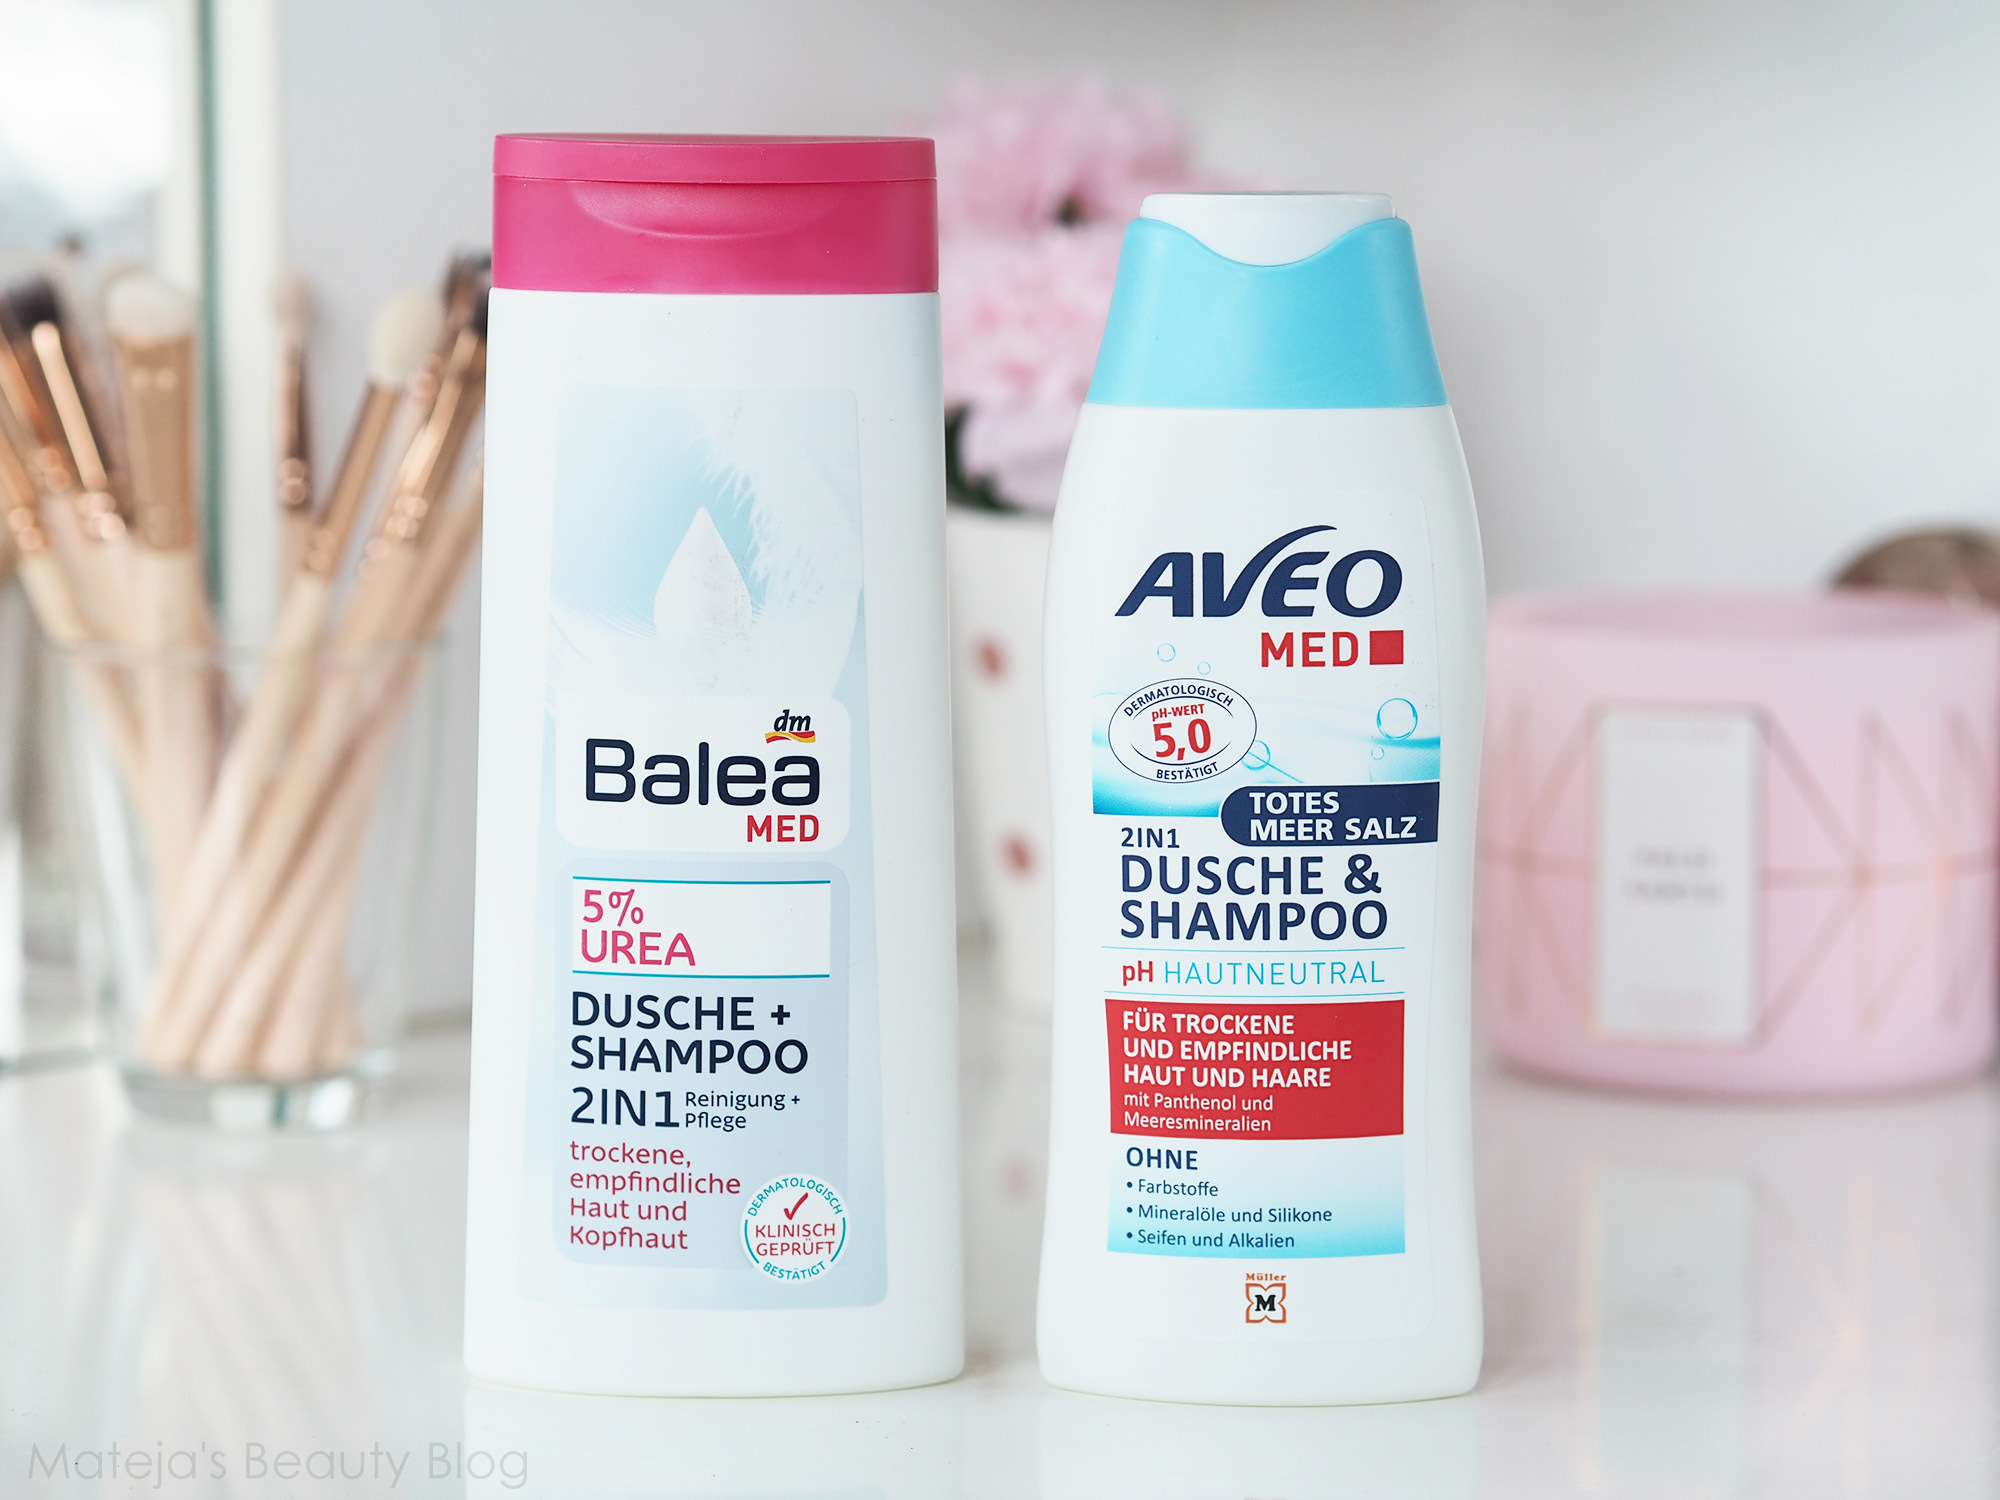 Current Hair Care Part 1: Shampoos, & Conditioners (2020) - Mateja's Beauty Blog